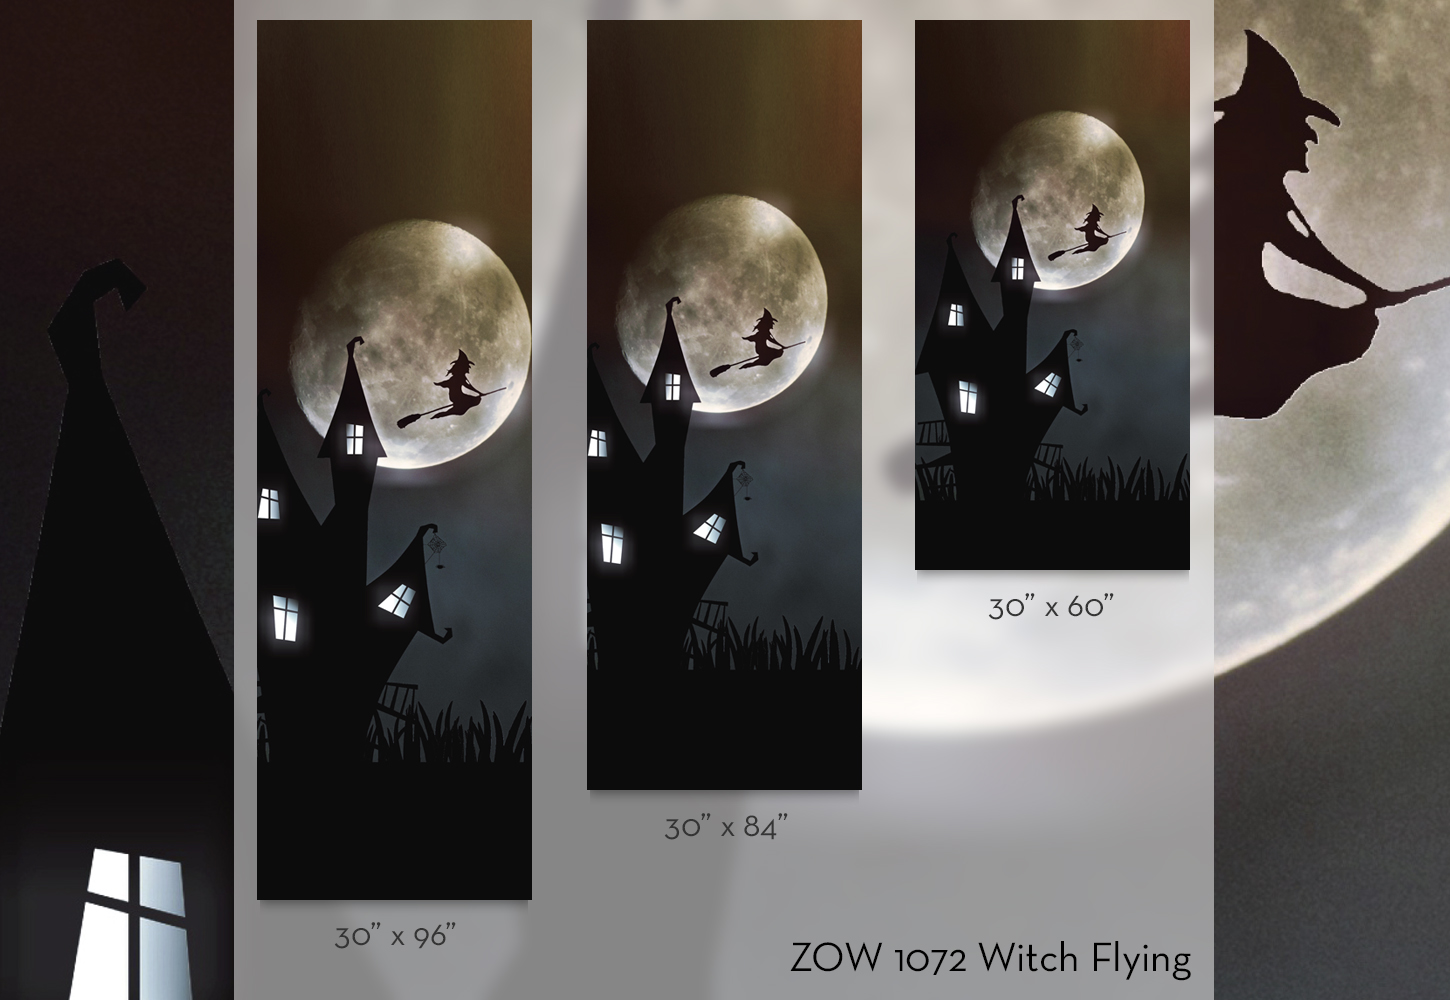 ZOW 1072 Witch Flying